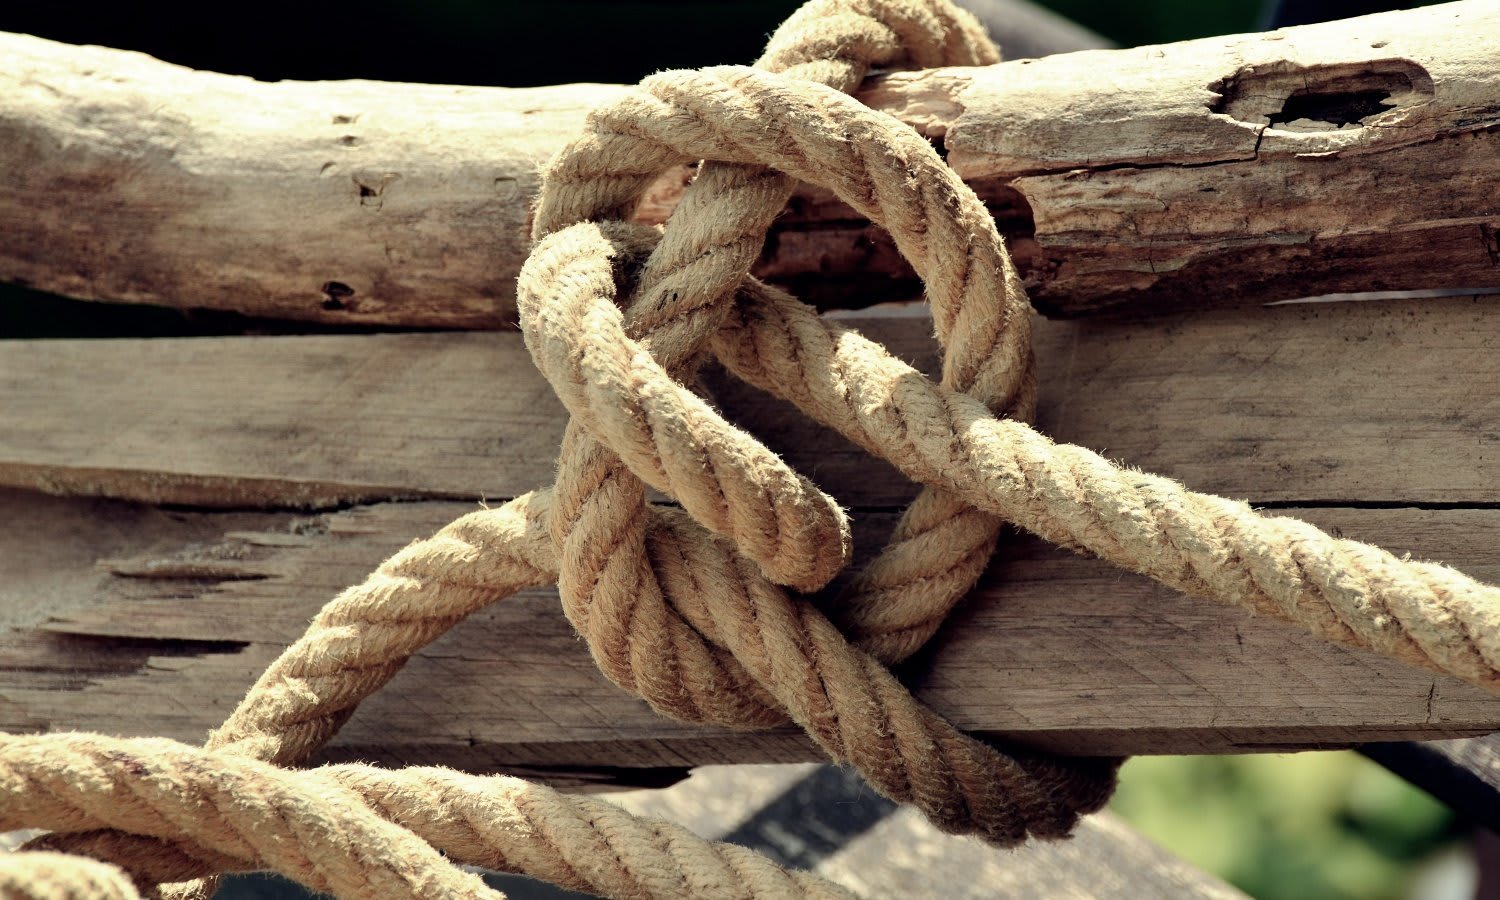 [VIDEO] Timber Hitch - How To a Tie Timber Hitch Knot Instructions + Uses